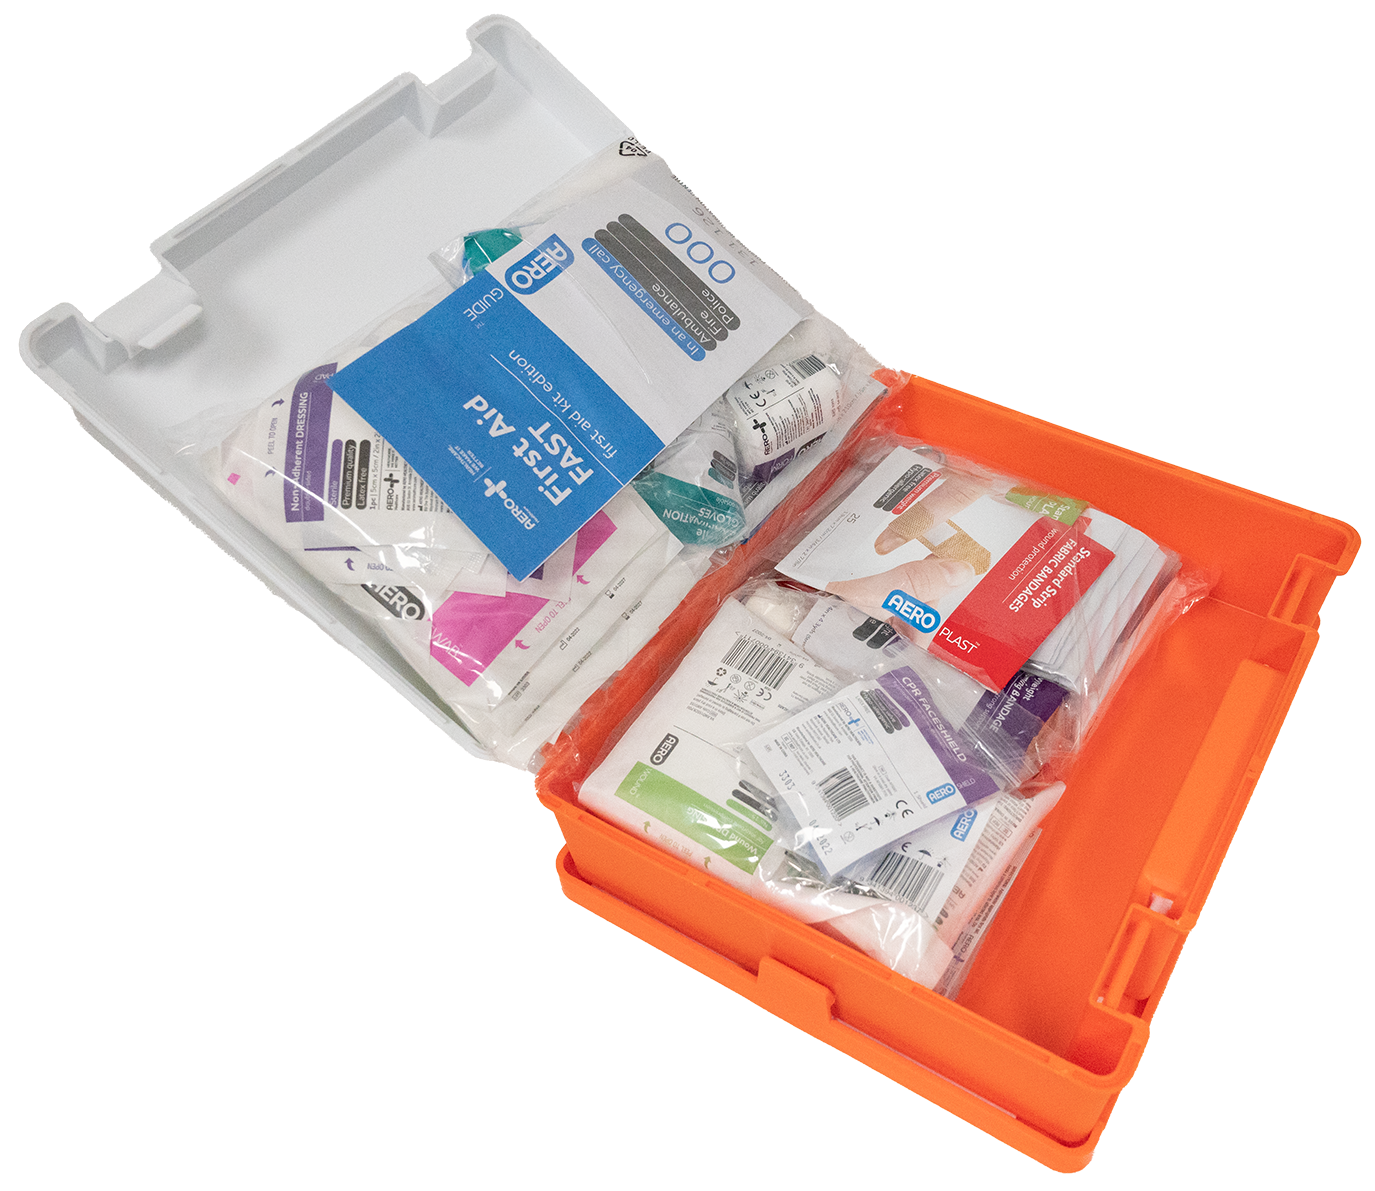 Workplace First Aid Kit - Portable Case